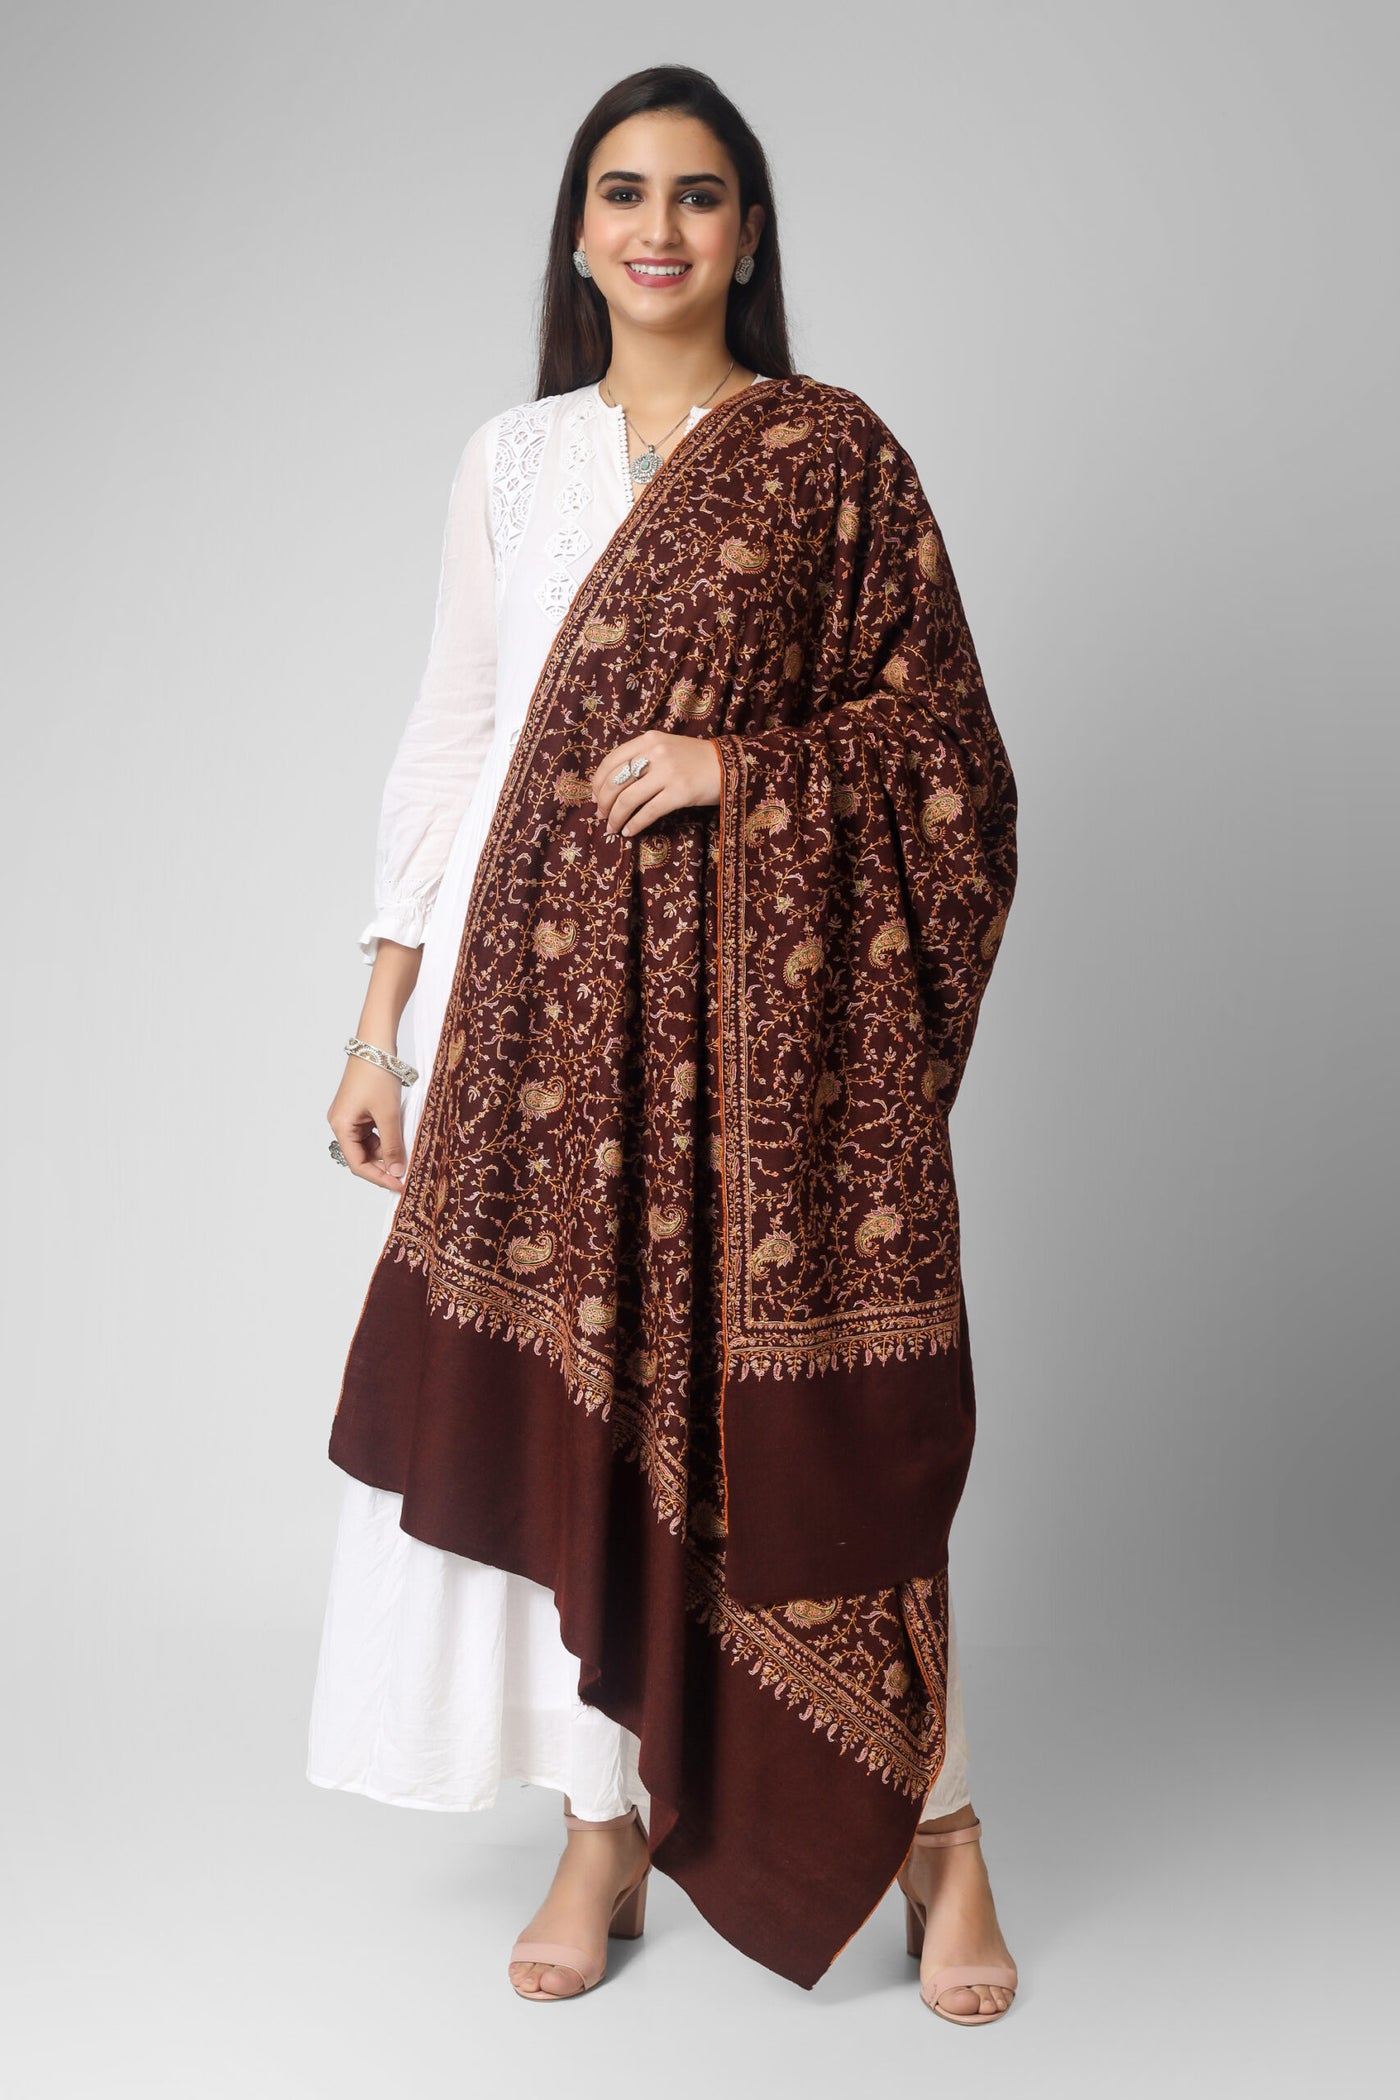 INDIAN SHAWL- The dark brown color of the shawl provides a rich and sophisticated background for the multicolor embroidery, which features intricate patterns and designs inspired by traditional Indian and Persian motifs. The embroidery is done by skilled artisans using fine threads and needles.